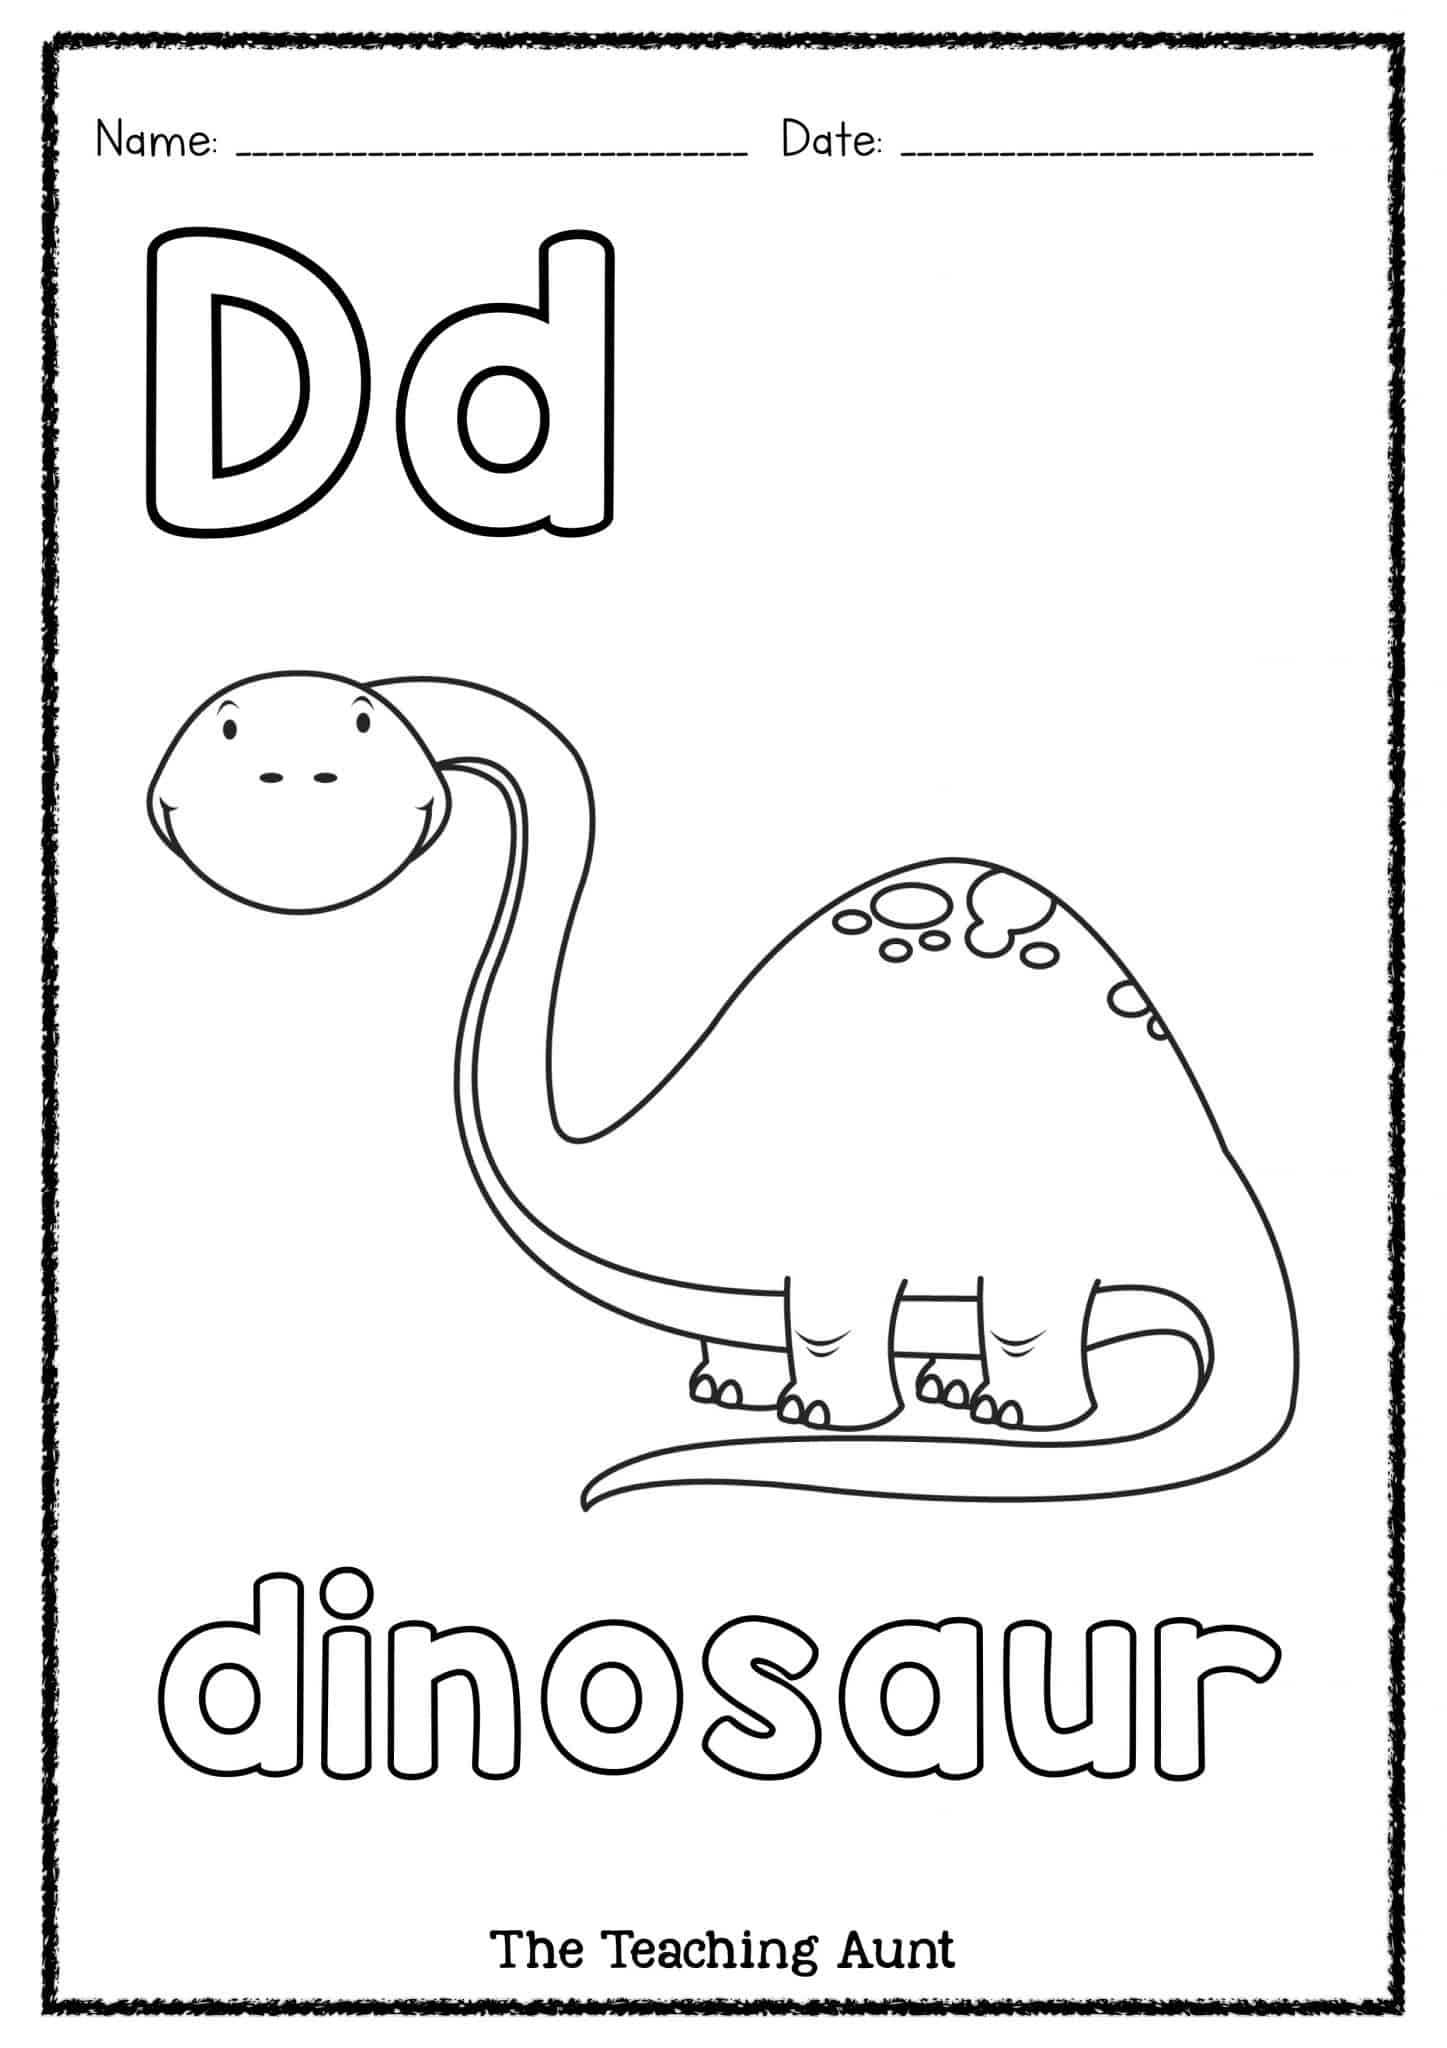 D is for Dinosaur Art and Craft The Teaching Aunt